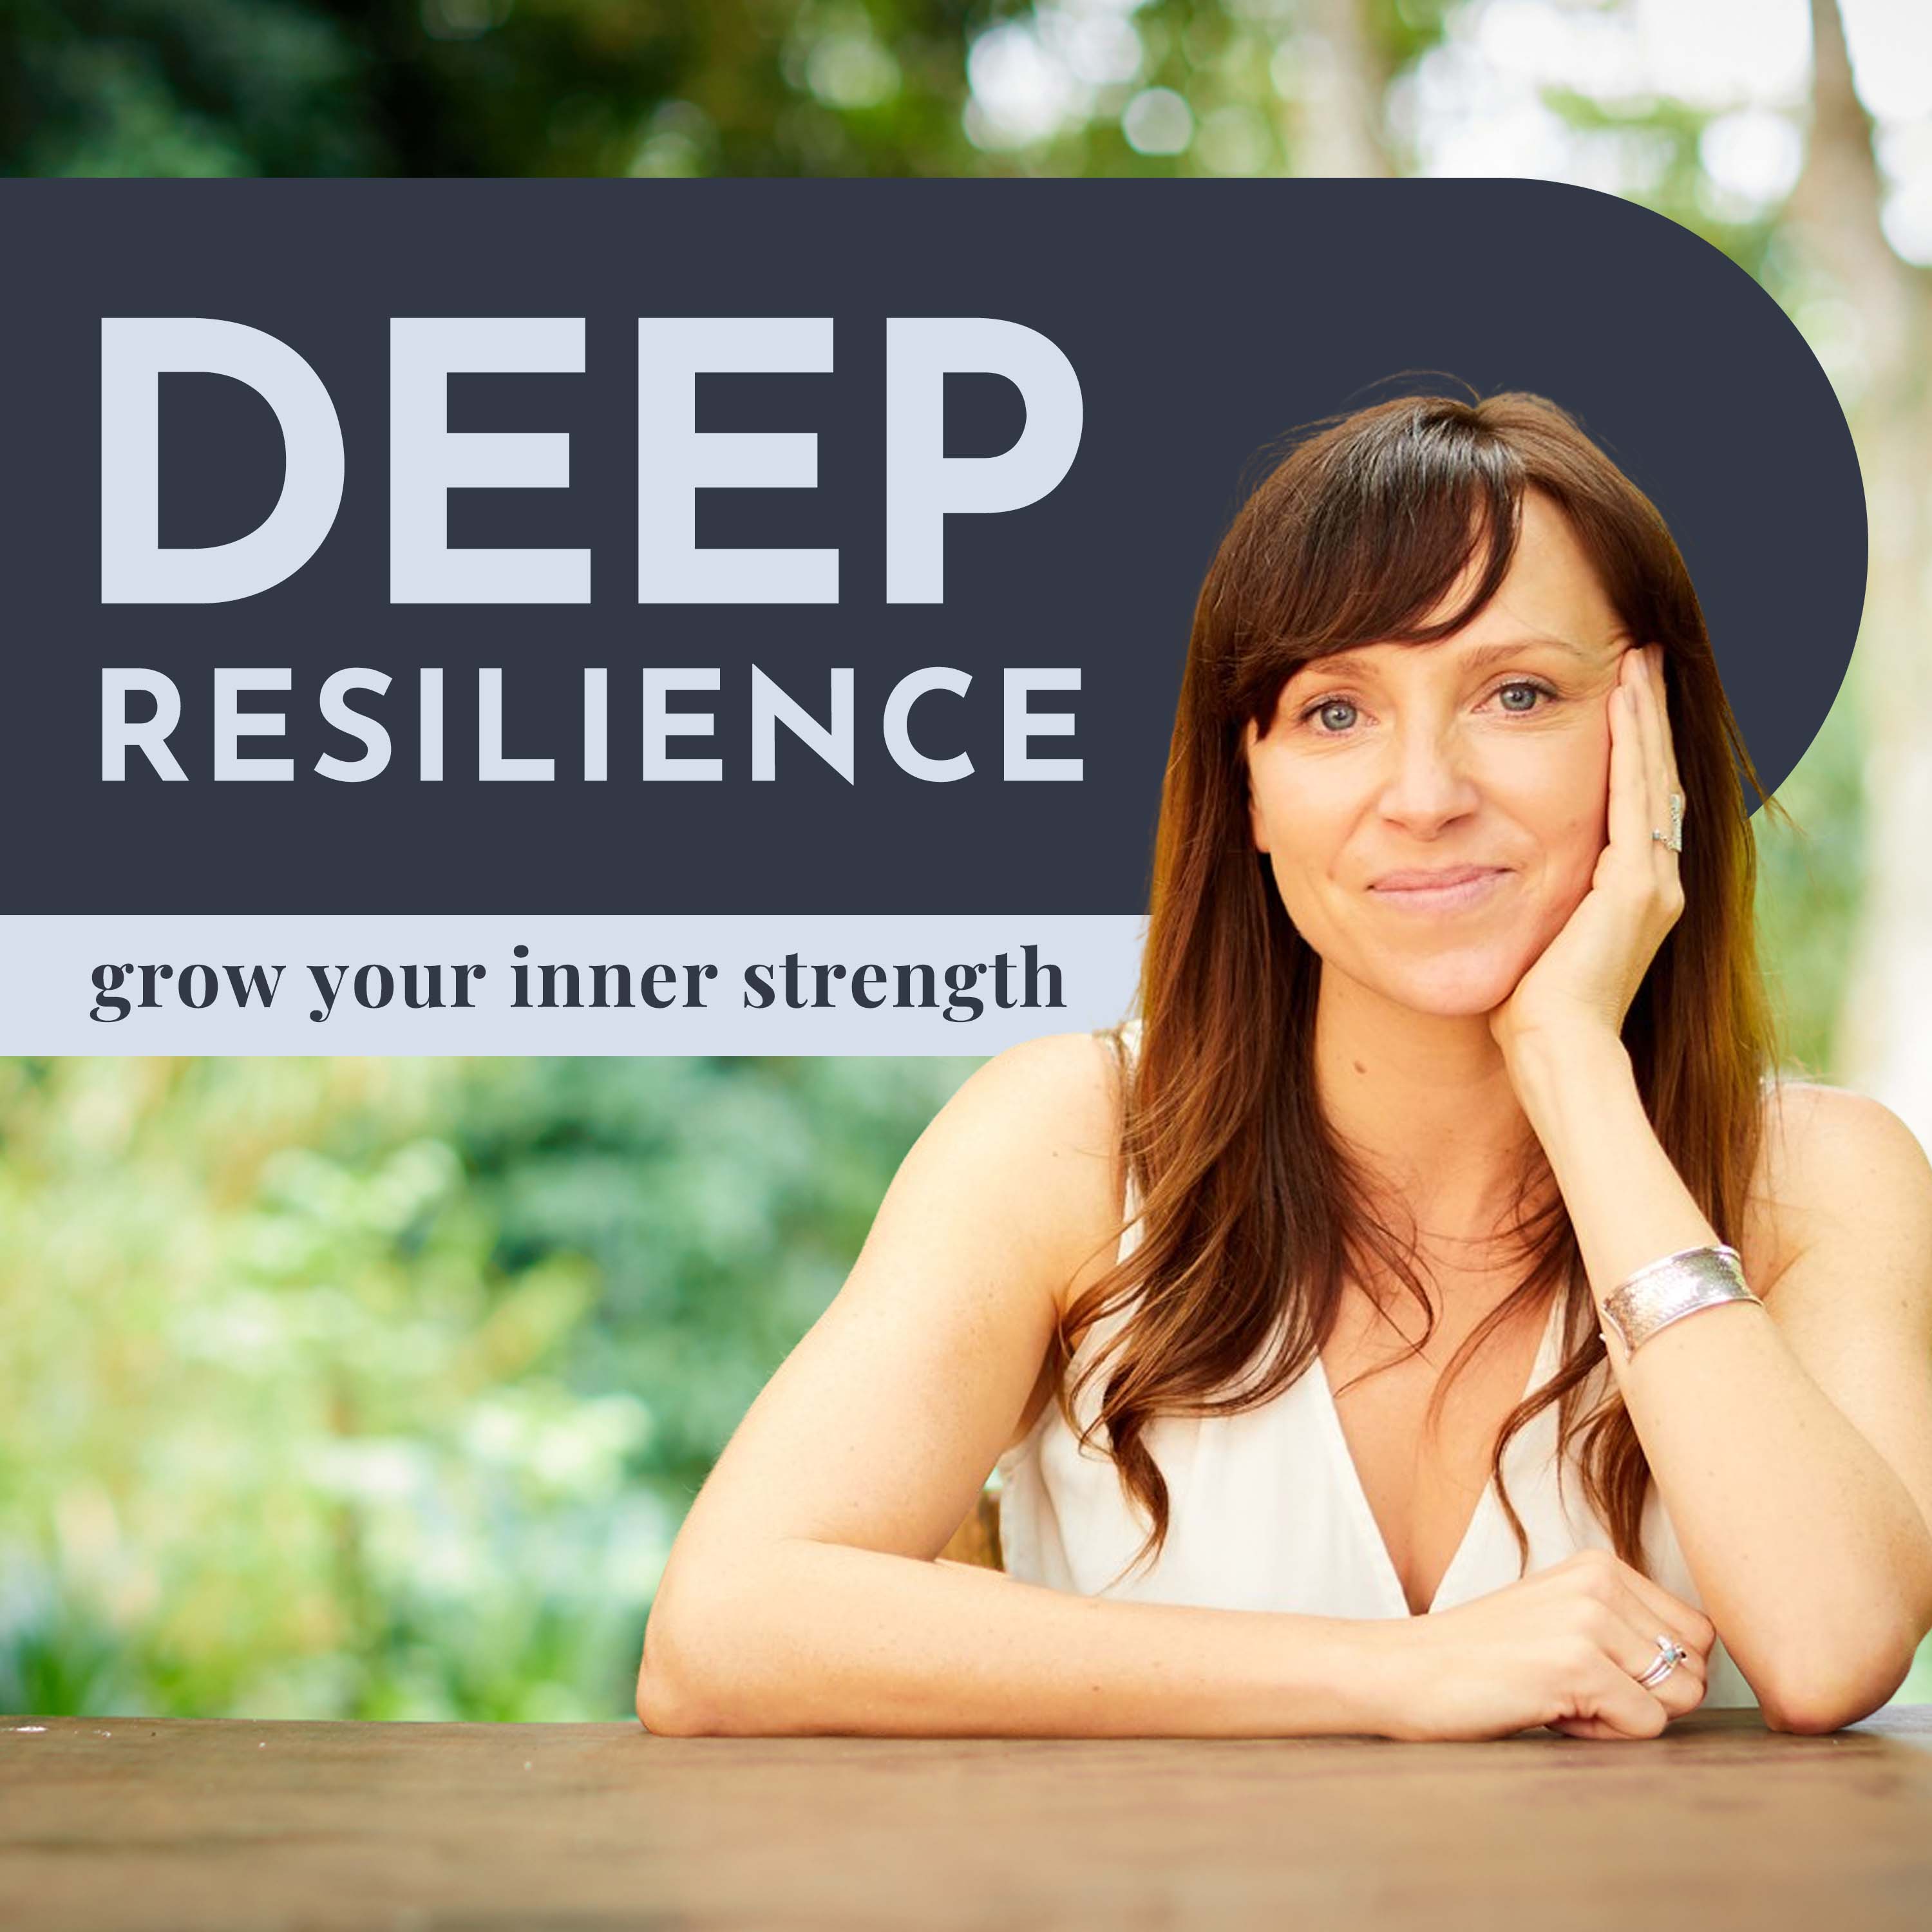 Deep Resilience - Grow Your Inner StrengthEpisode 1 by Melli O'Brien